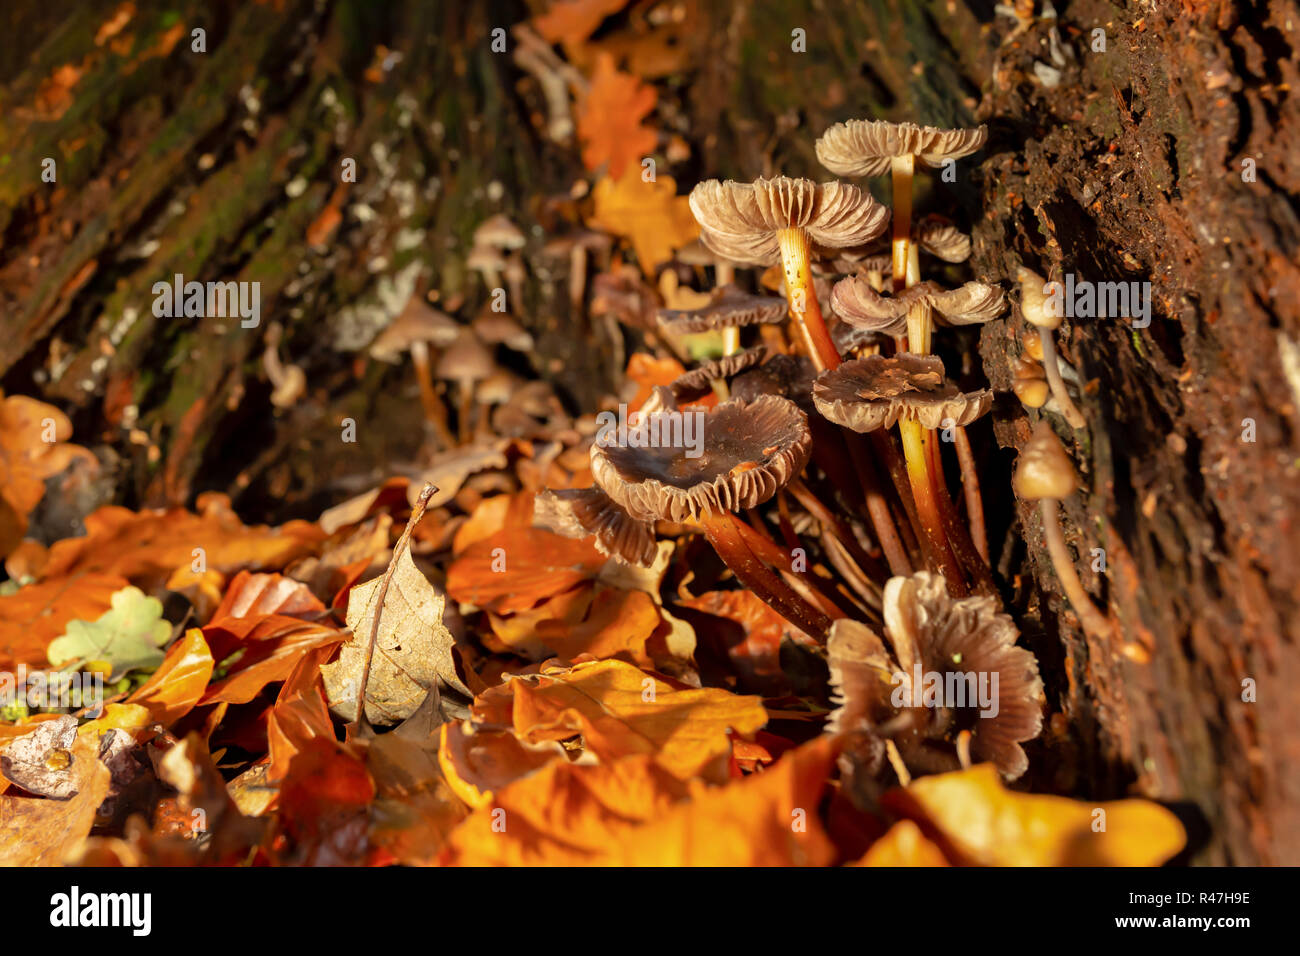 Clump of brown mushrooms found within old rotten Oak stump surrounded by Autumn leaf fall in landscape orientation. Stock Photo